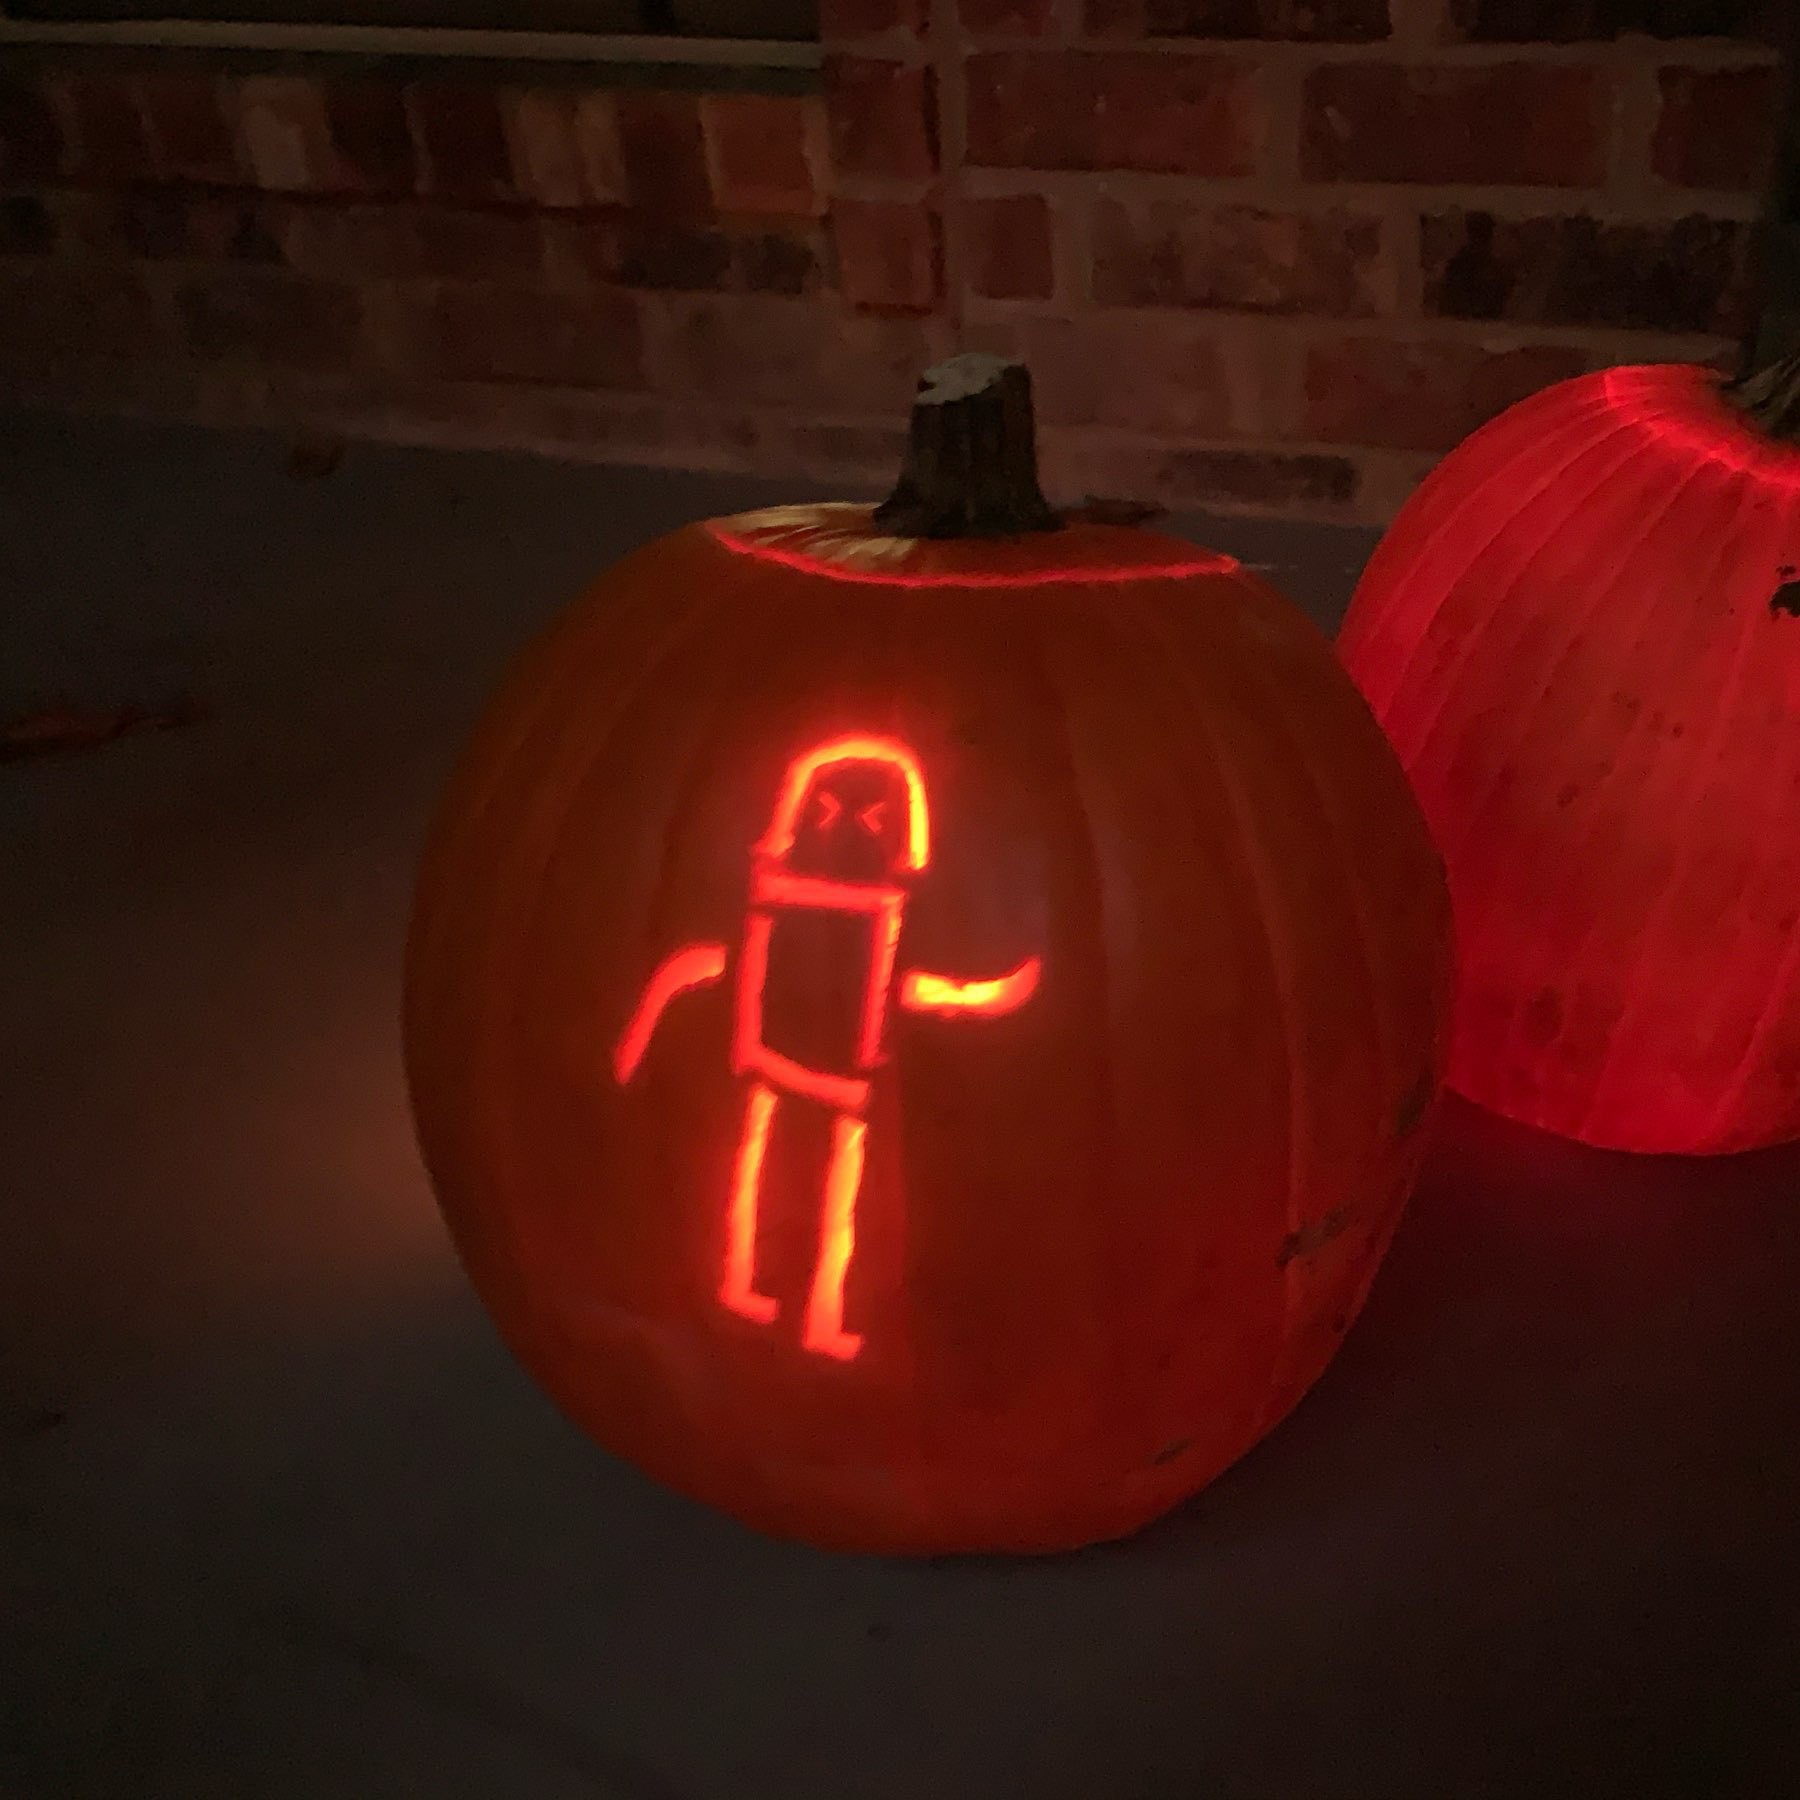 Robot carved into a lighted pumpkin